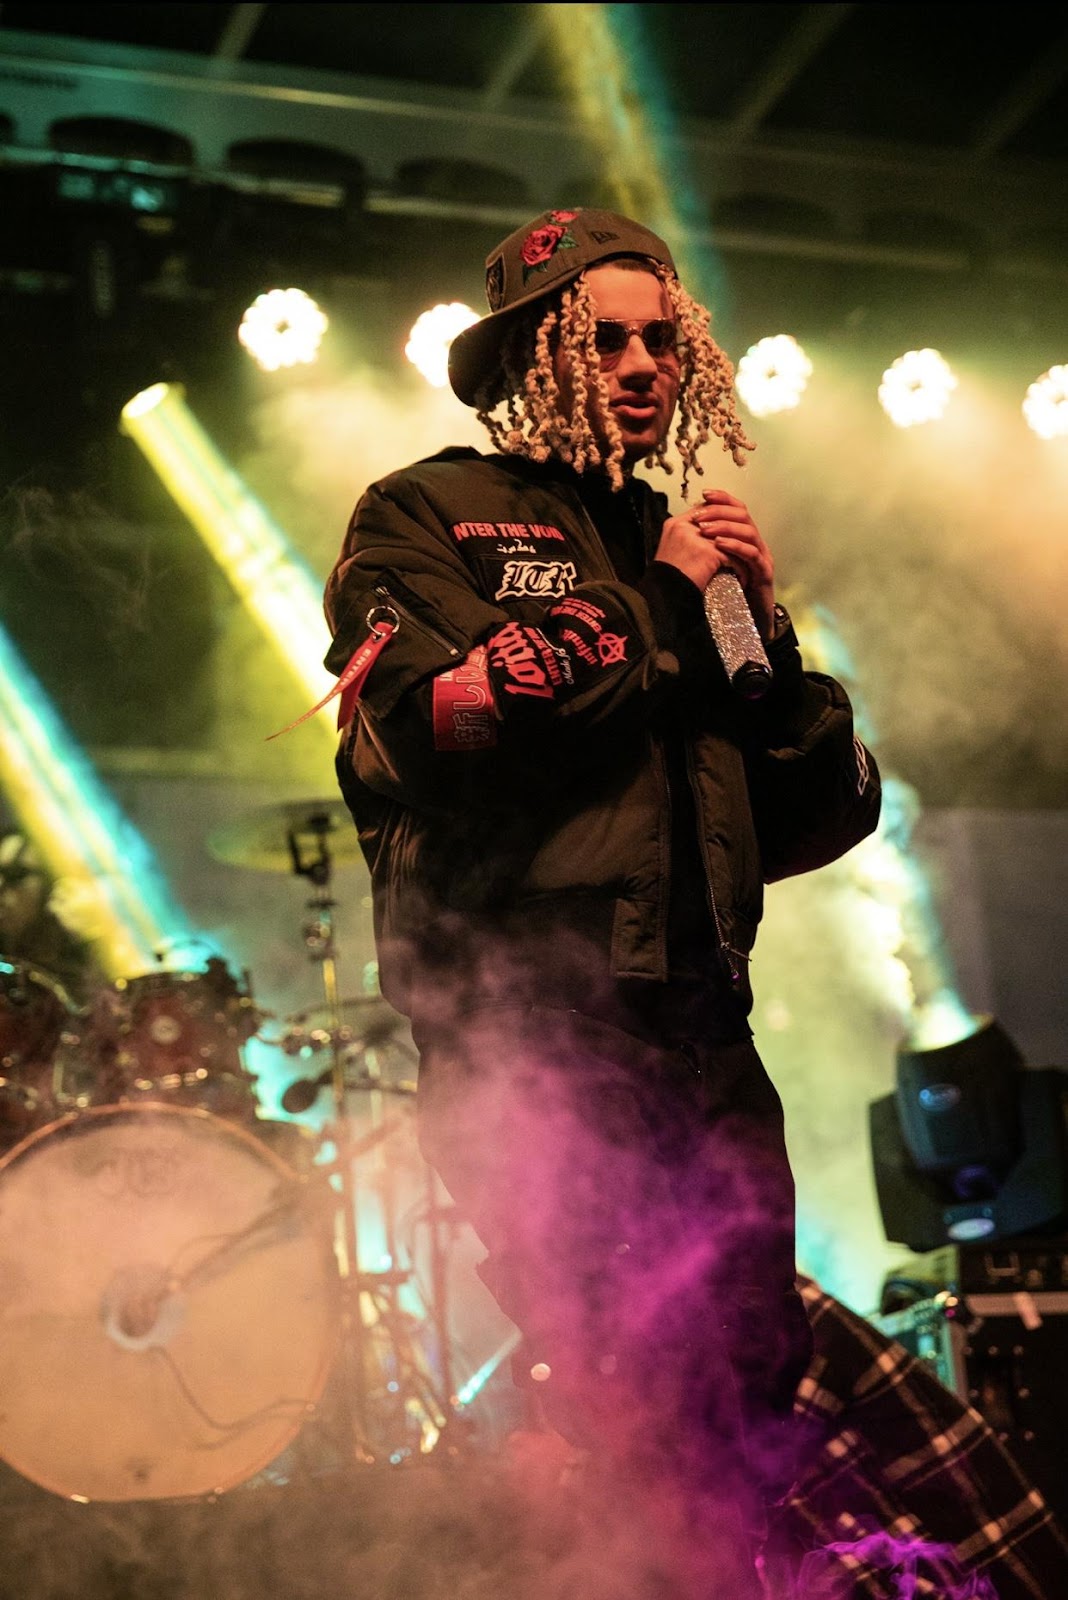 A person with dreadlocks on stage

Description automatically generated